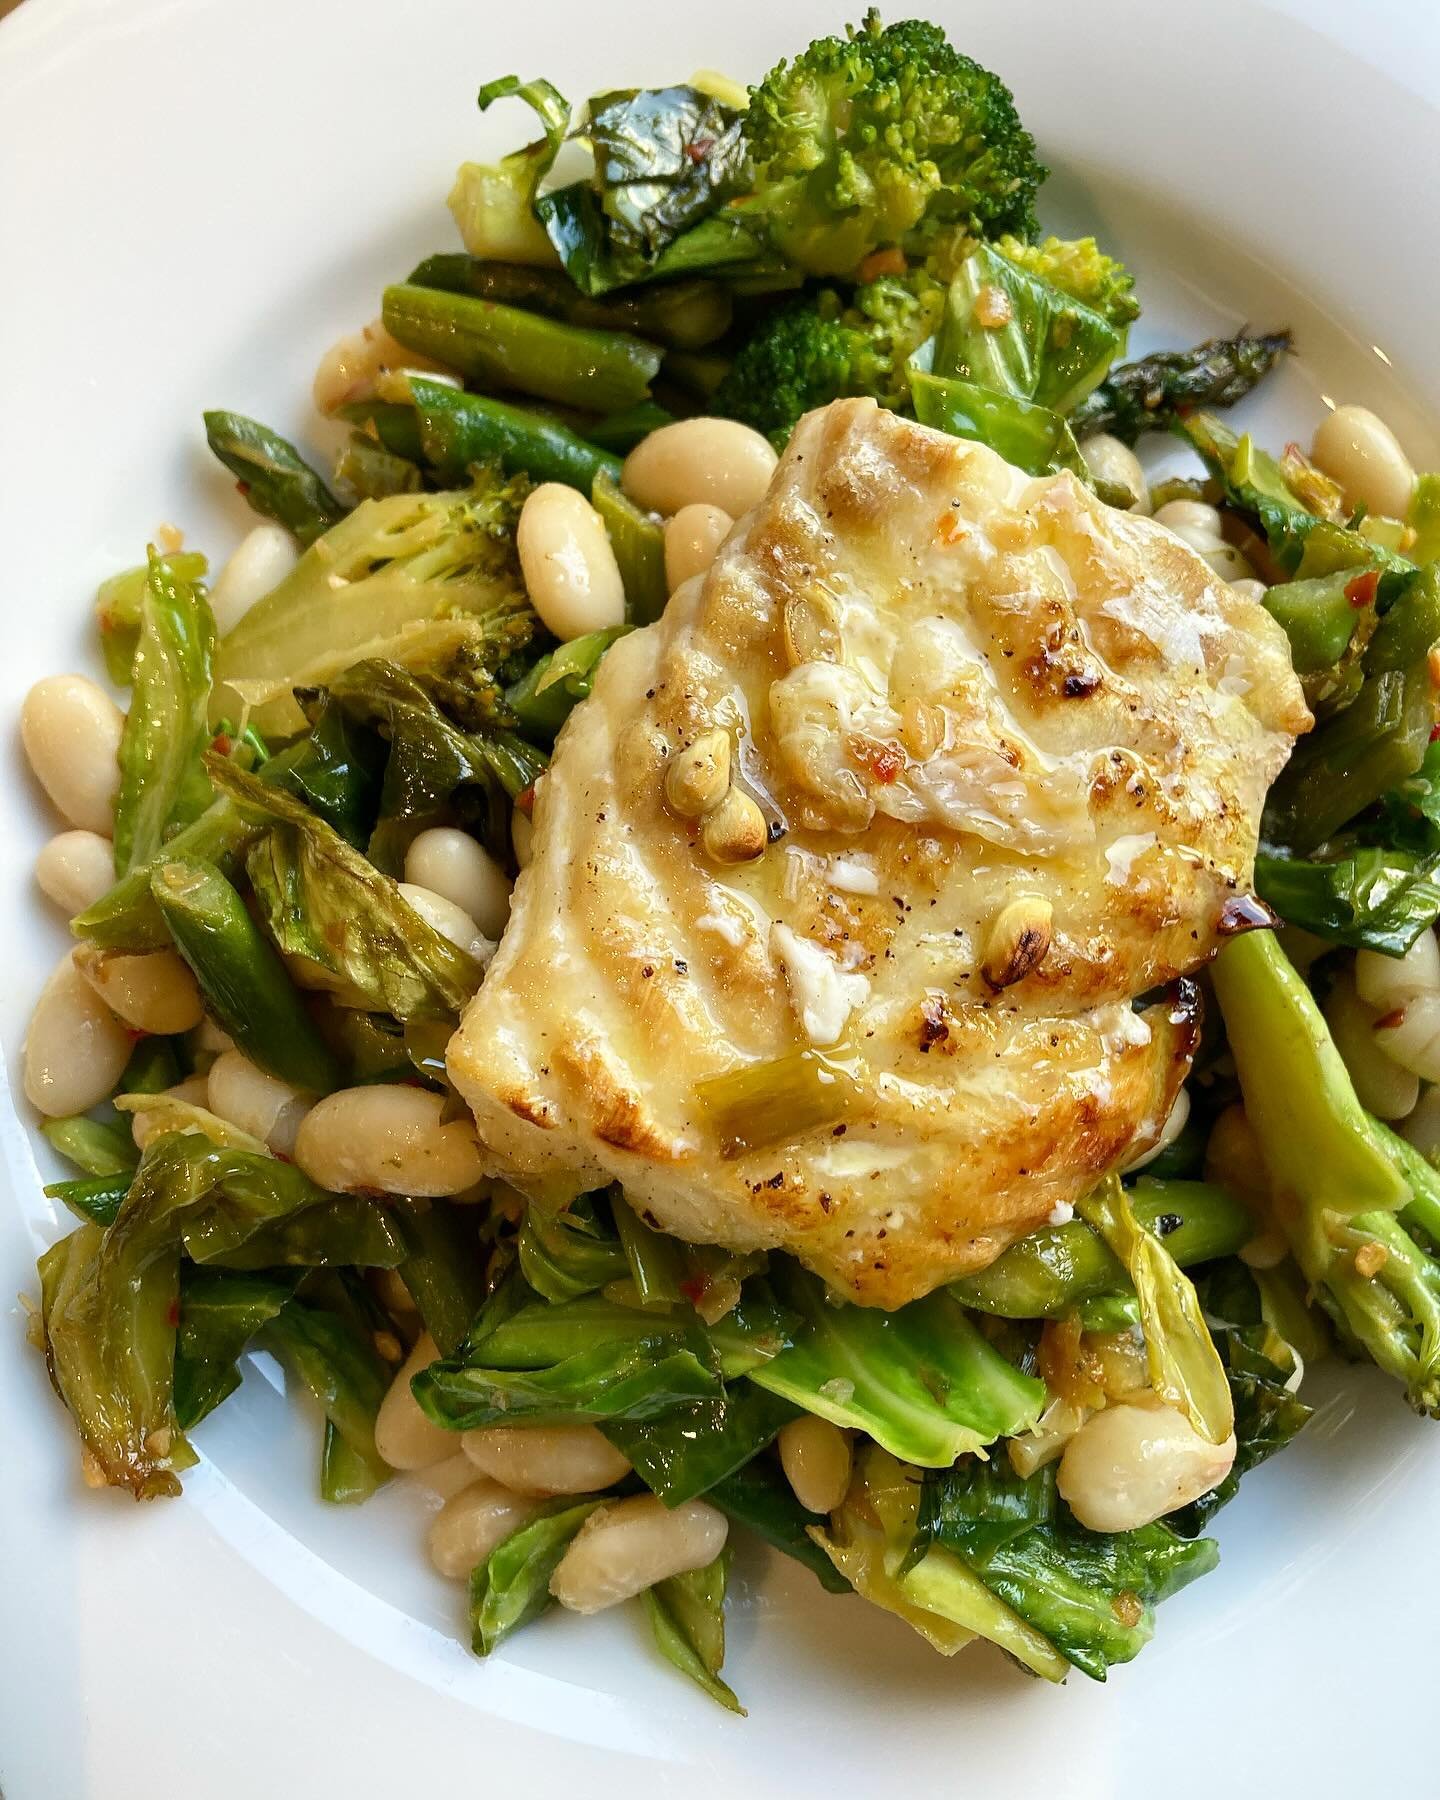 Speedy dinner after a busy weekend in London. Baked cod, cannellini beans &amp; stir fry greens 🥬 🥦 with olive oil, lemon &amp; chilli salt 

#easydinner #simplemeal